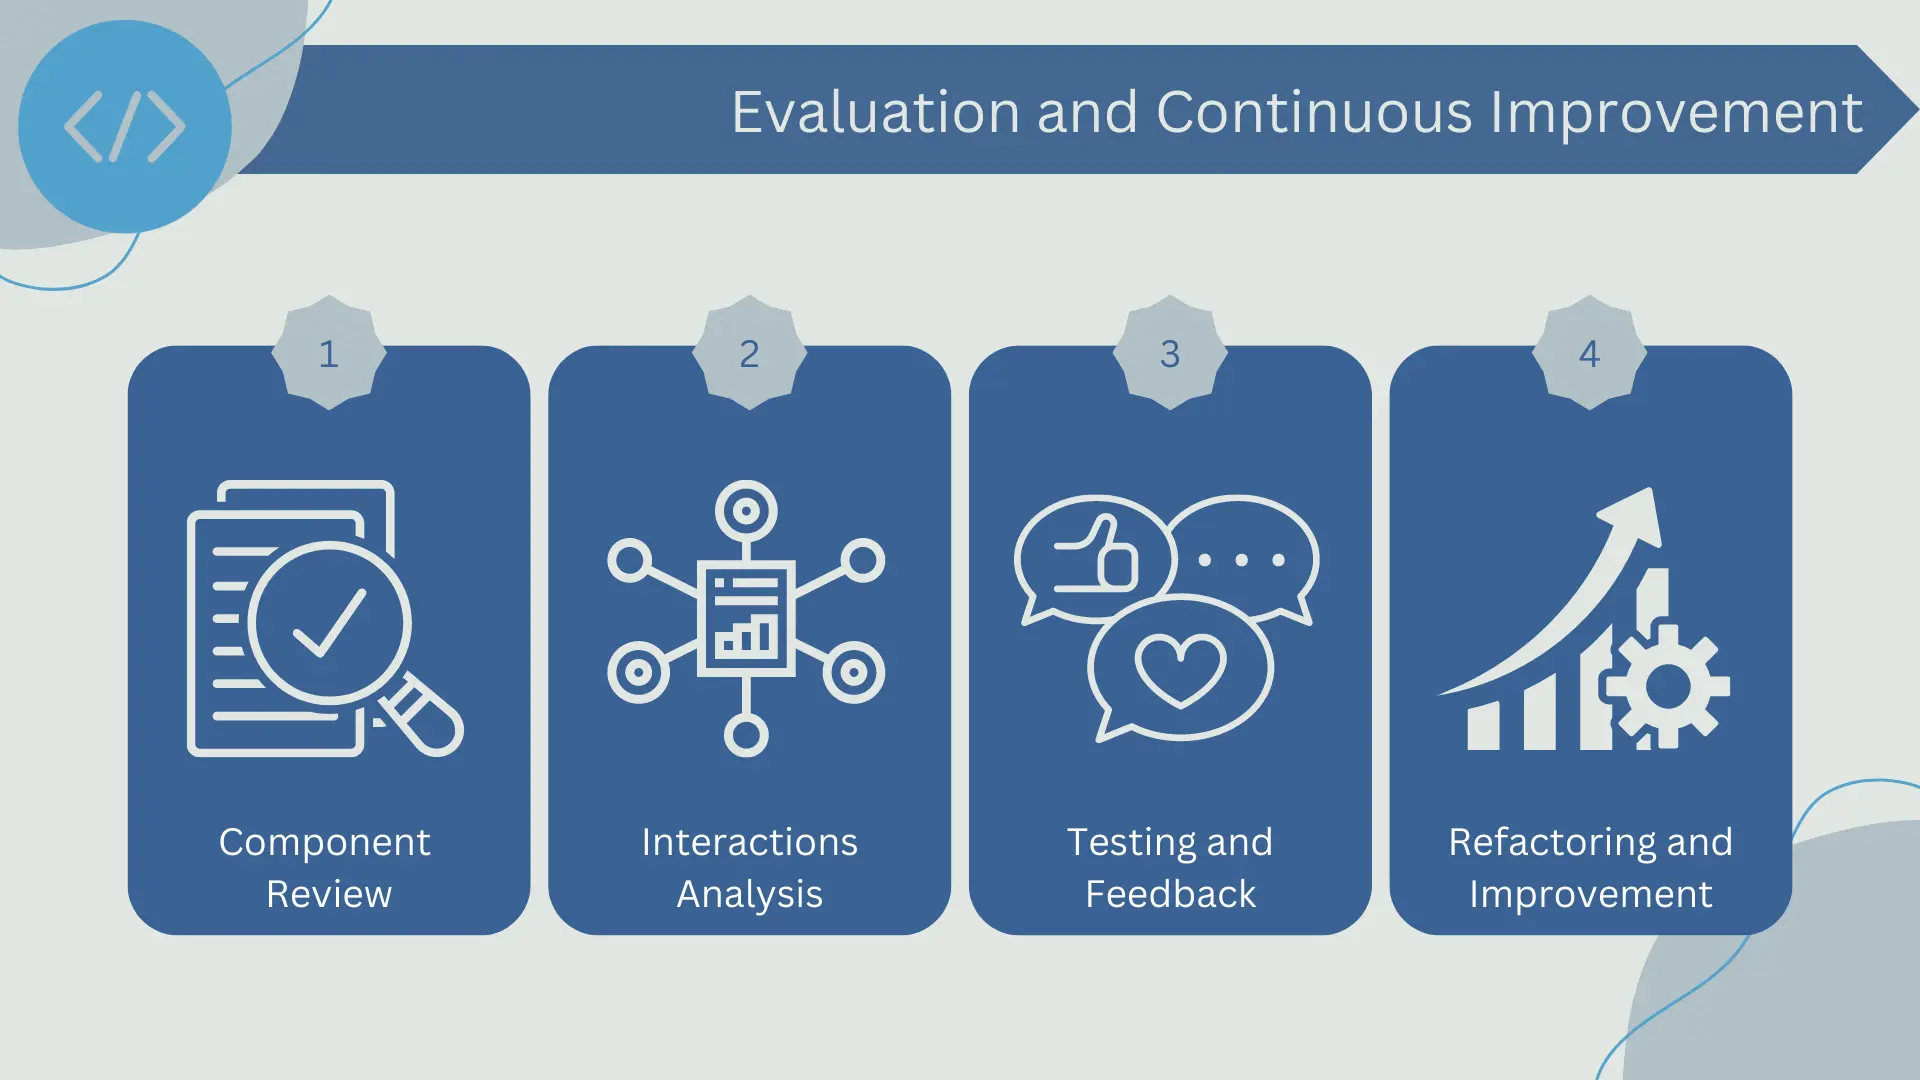 Evaluation and continuous improvement